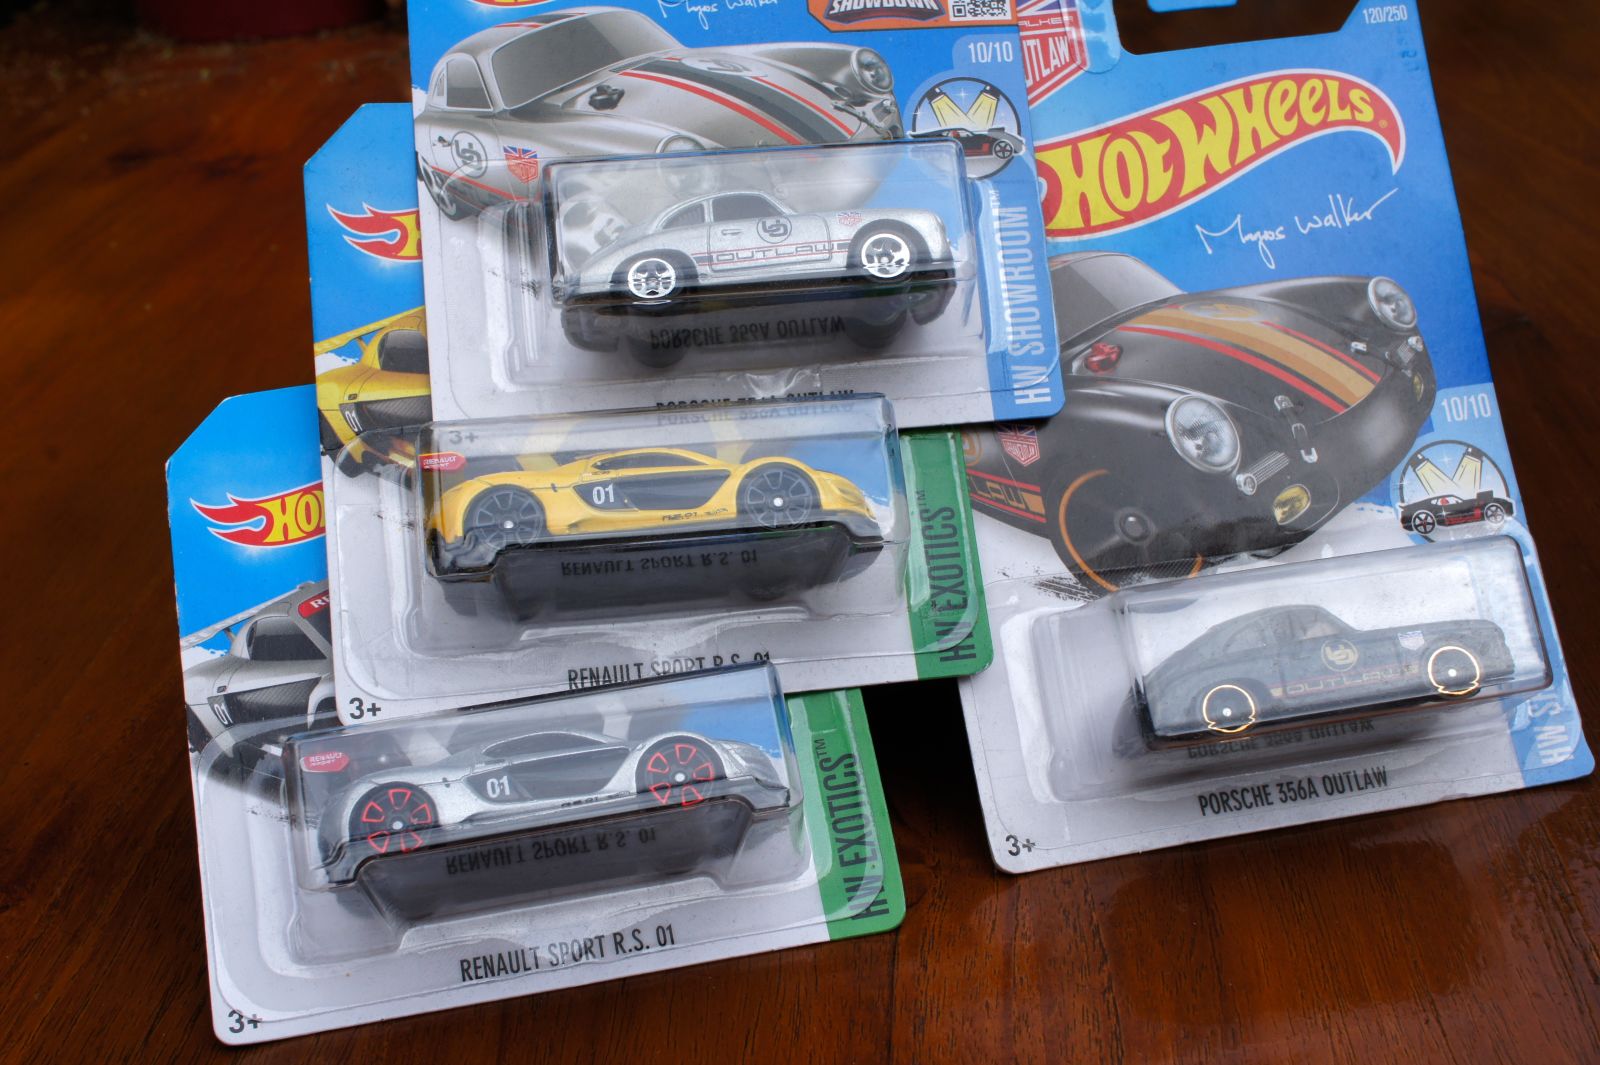 The yellow R.S.01 was the only car I knew I was getting, the rest just makes clear SSS knows what I like.